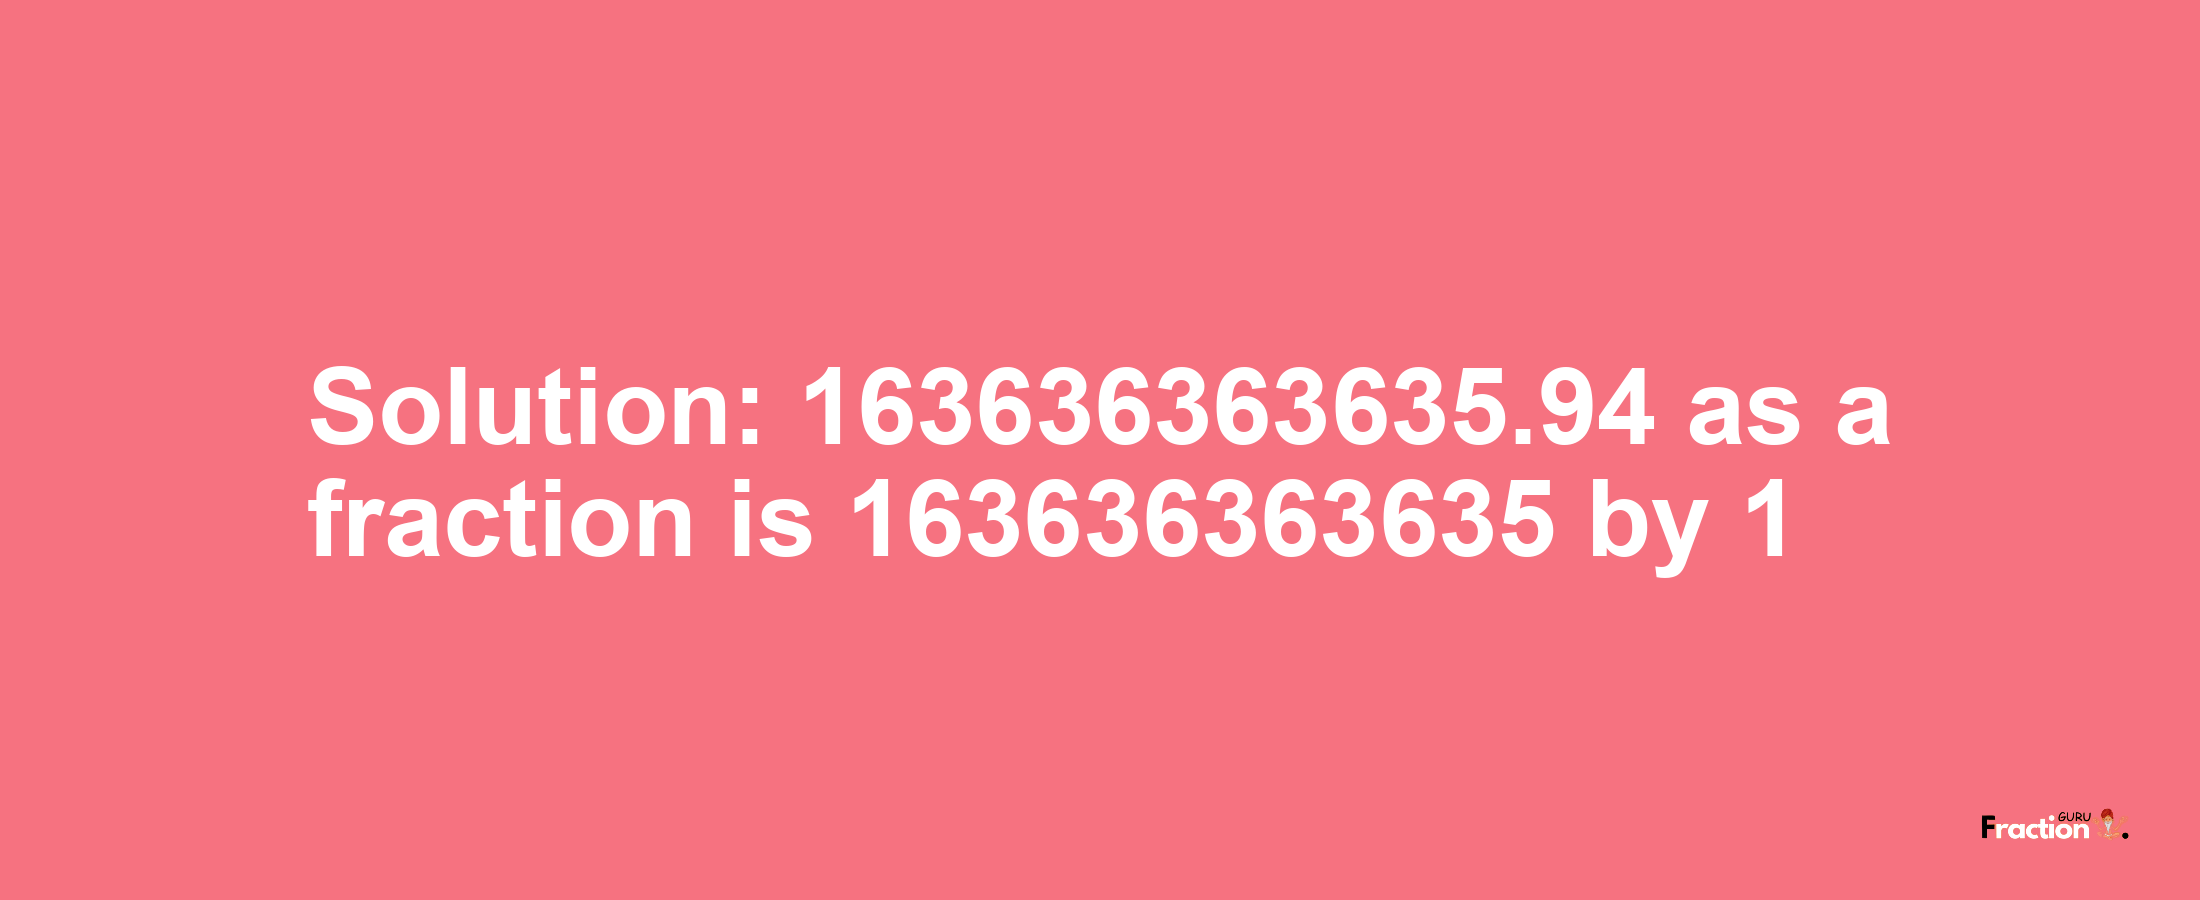 Solution:163636363635.94 as a fraction is 163636363635/1